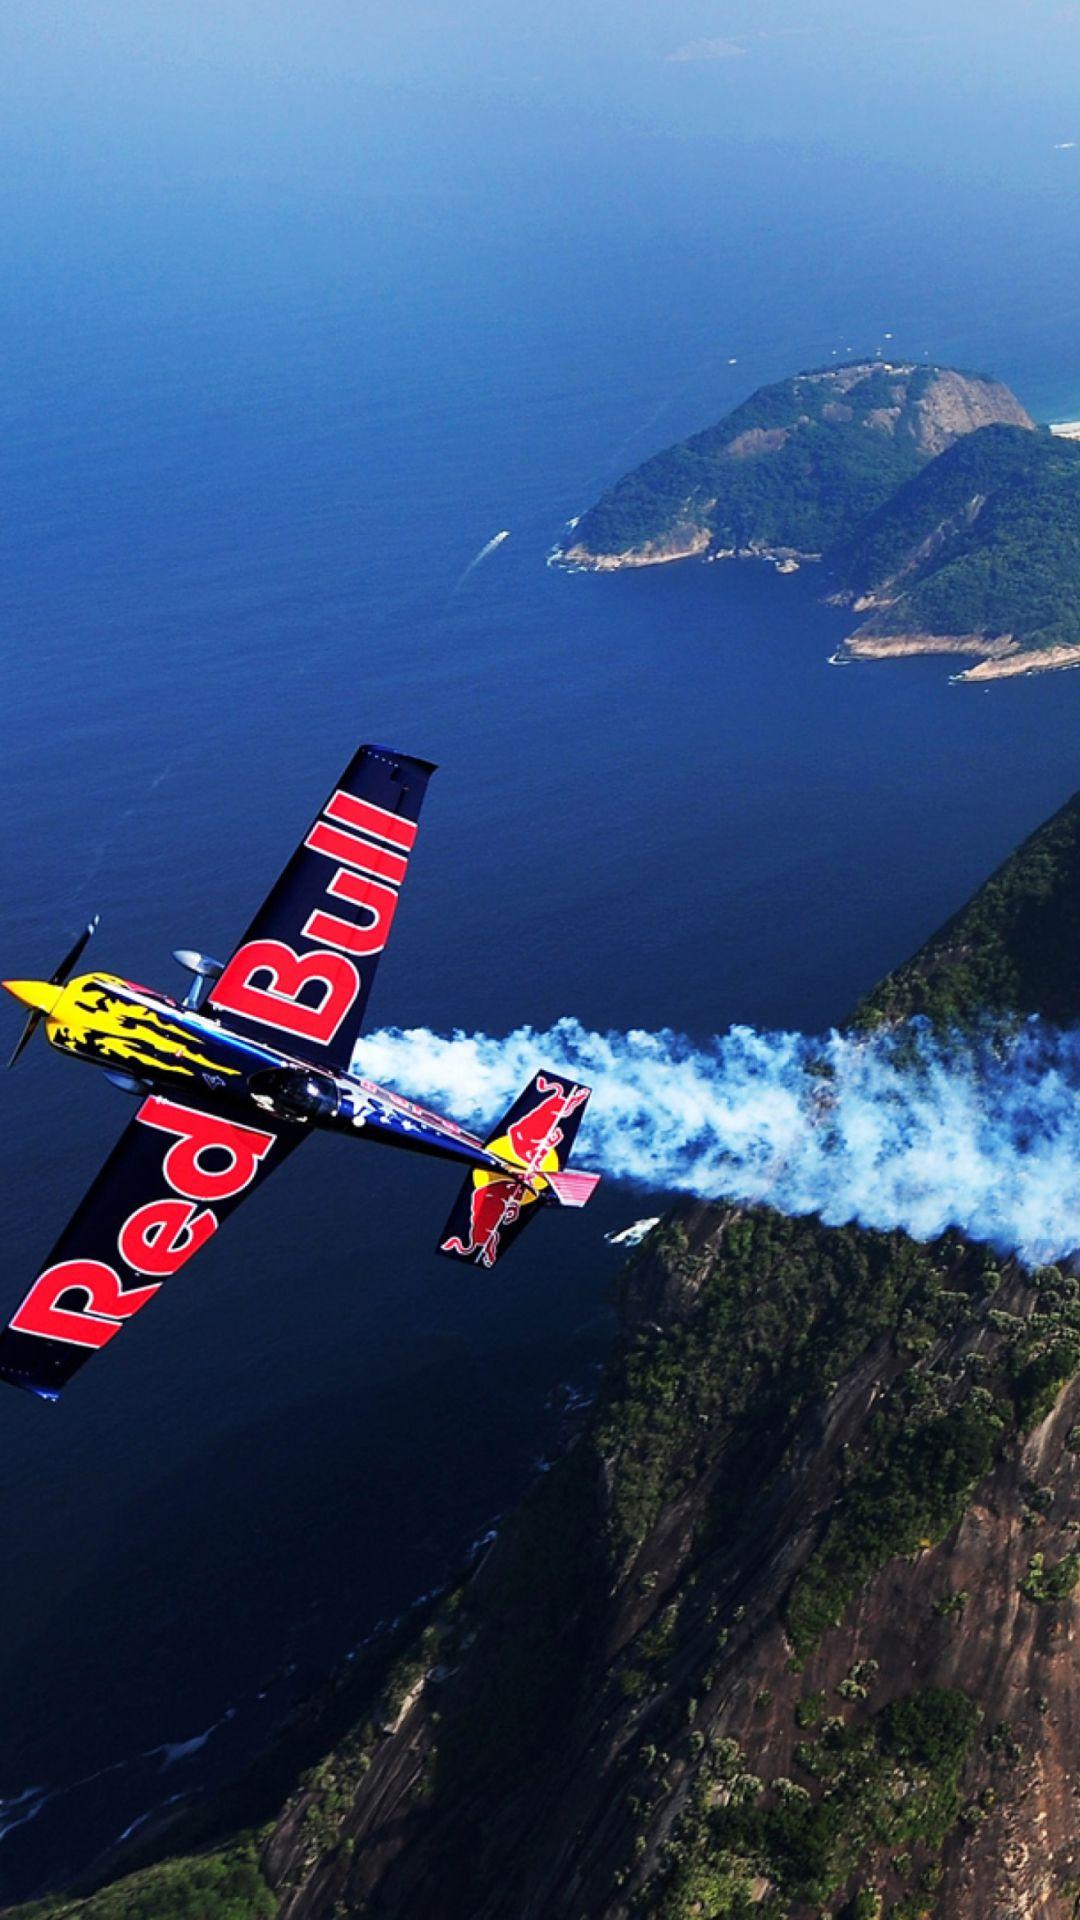 Wallpaper.wiki Red Bull Airplane IPhone Background PIC WPC002236